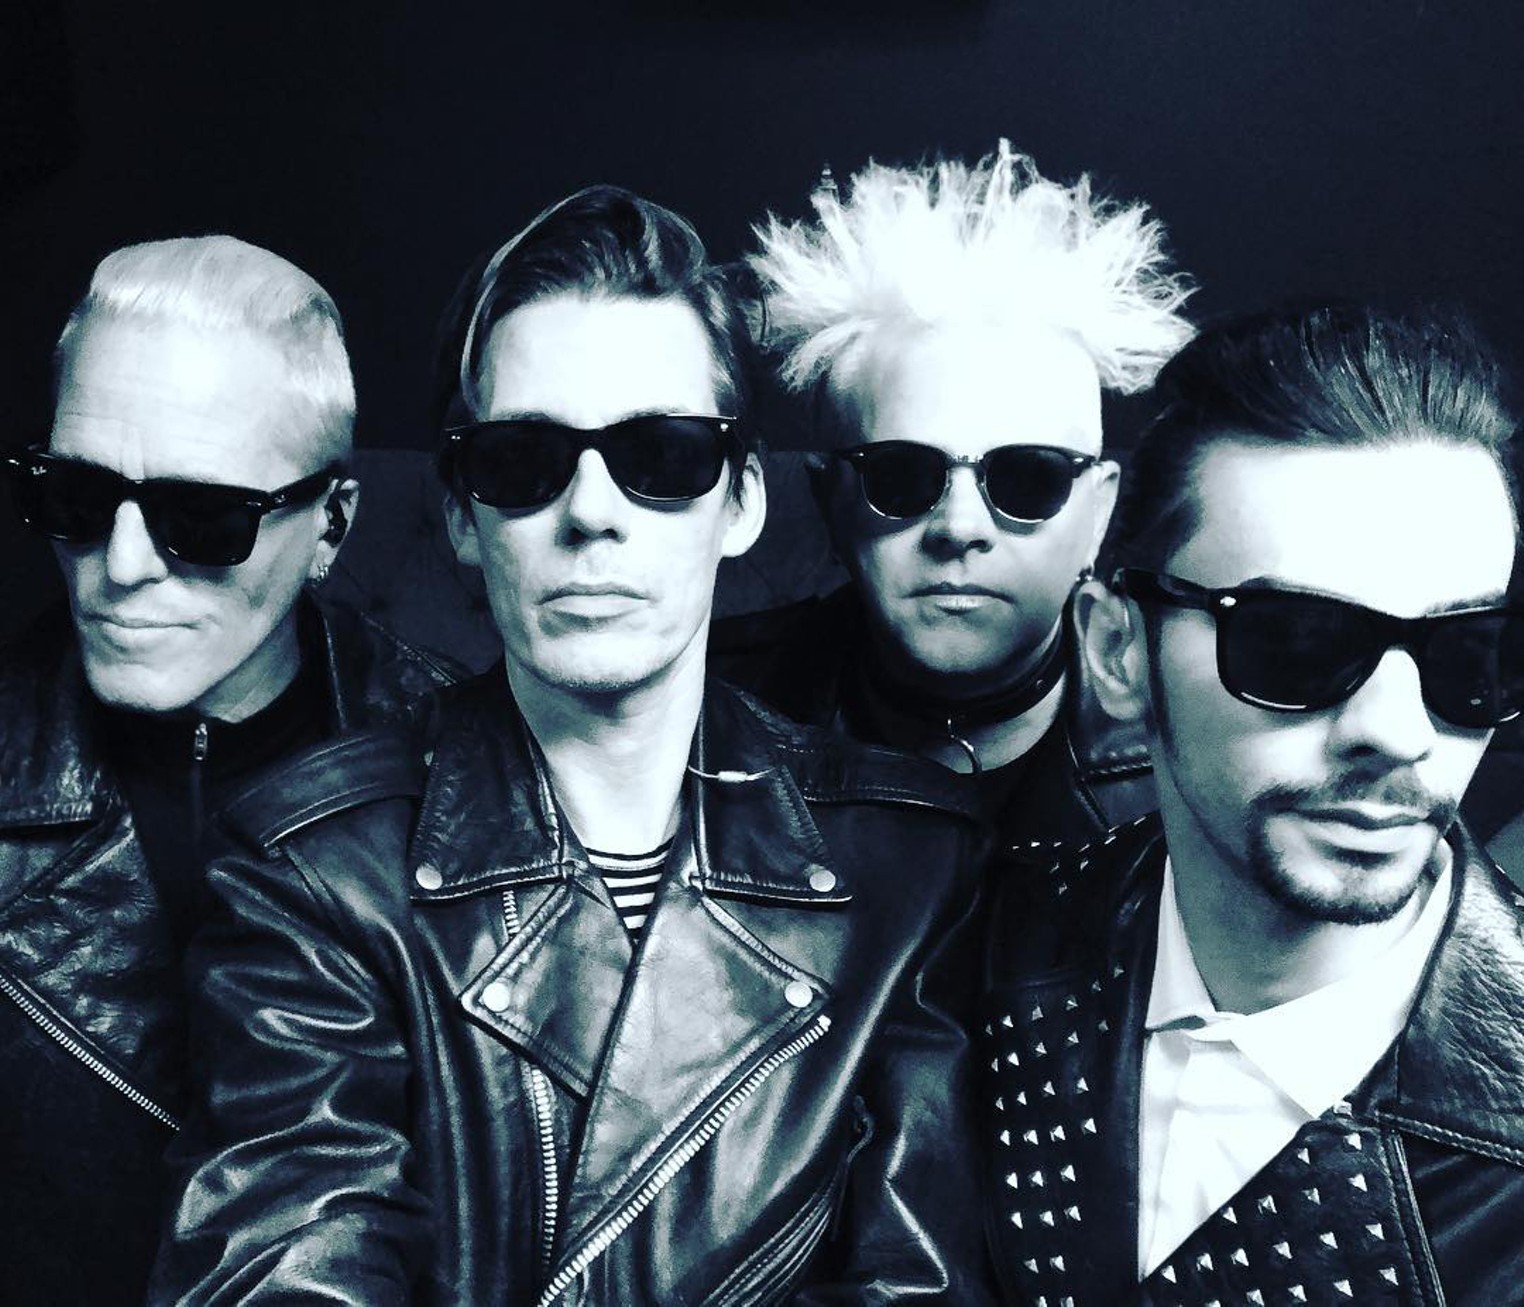 Depeche Mode Tribute Band Has Stamp of Approval From the Original